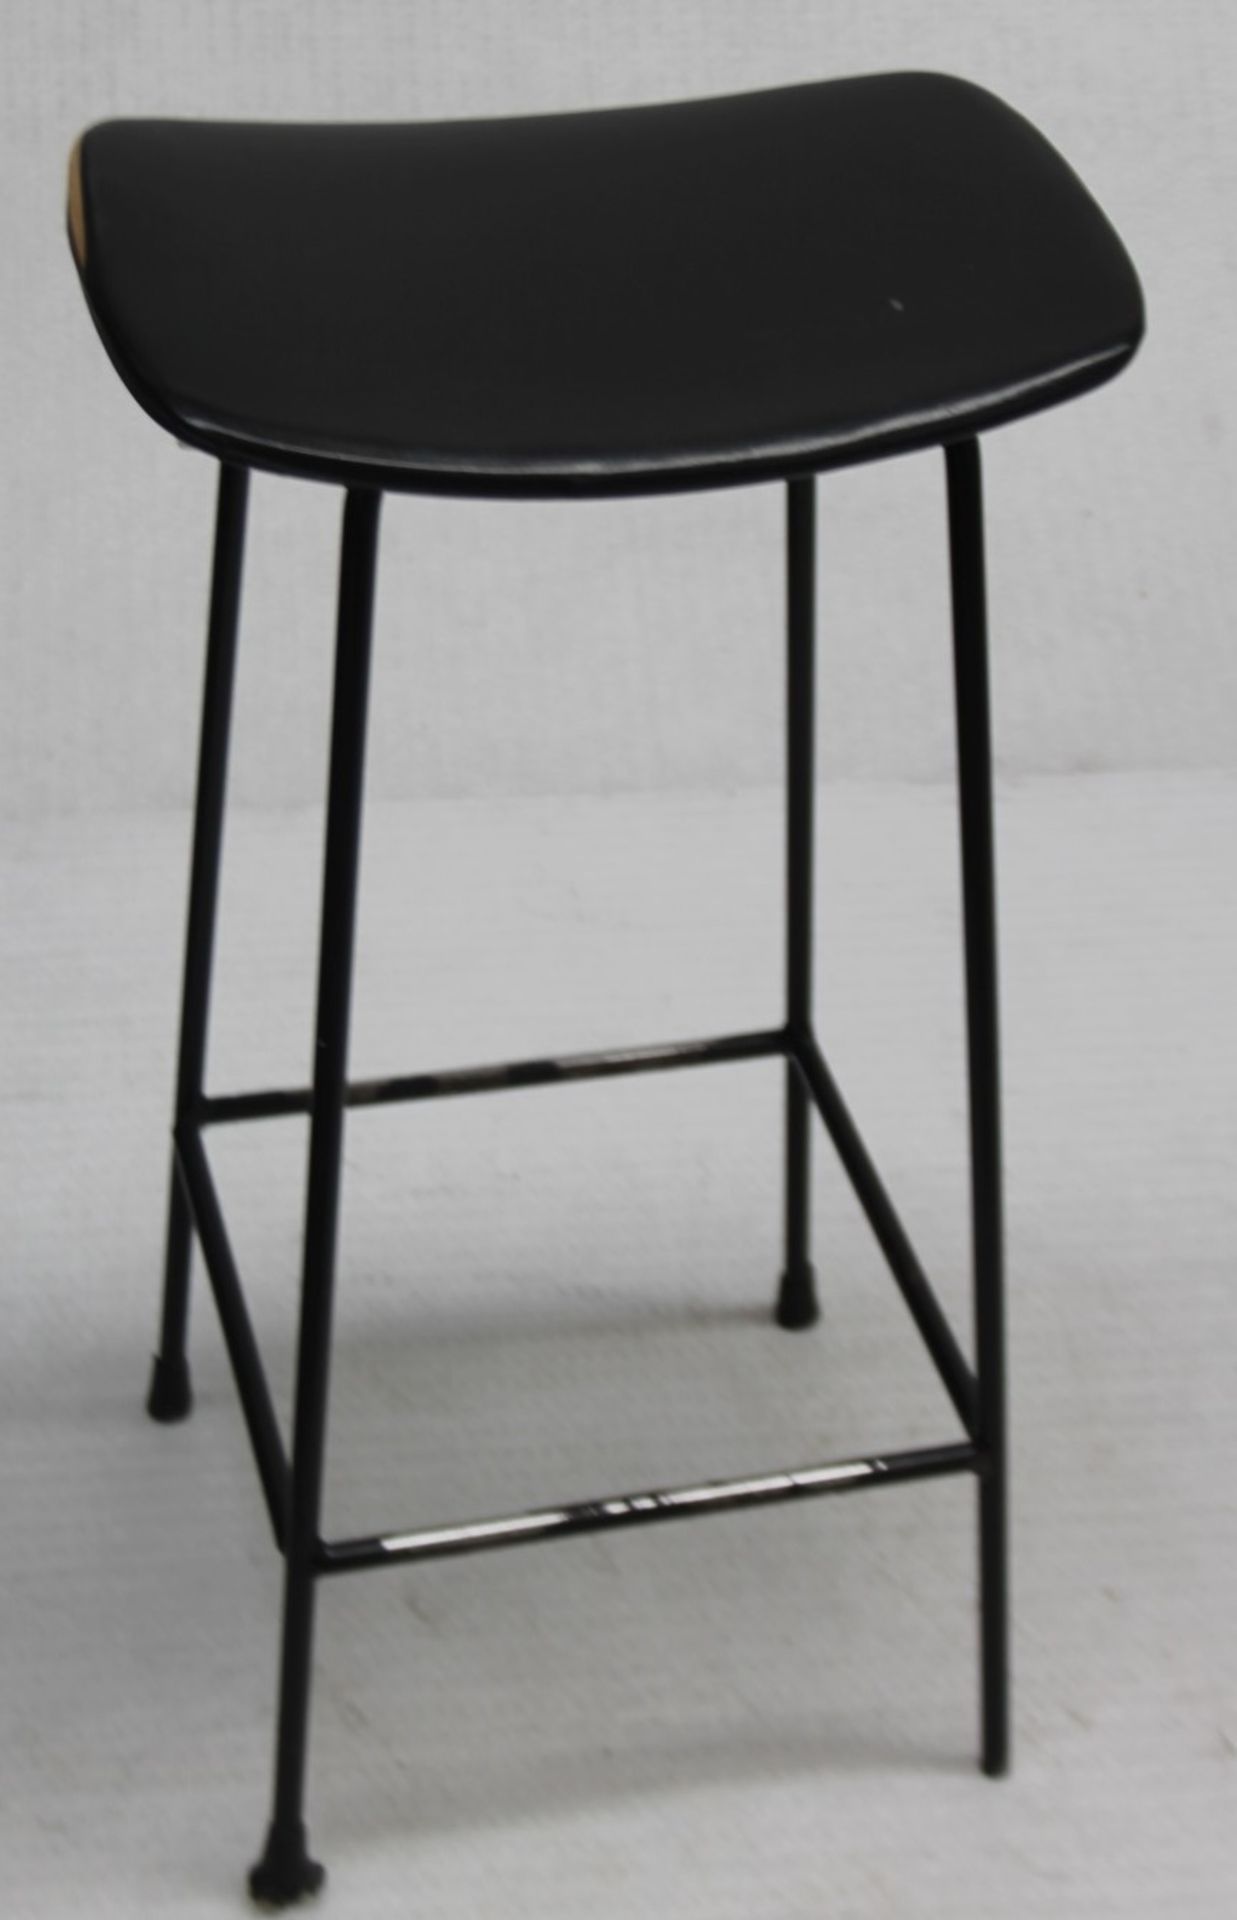 4 x Items Of Salon Furniture Including A Pair Of Stylists Trolleys, Table and Stool  - Recently - Image 5 of 11